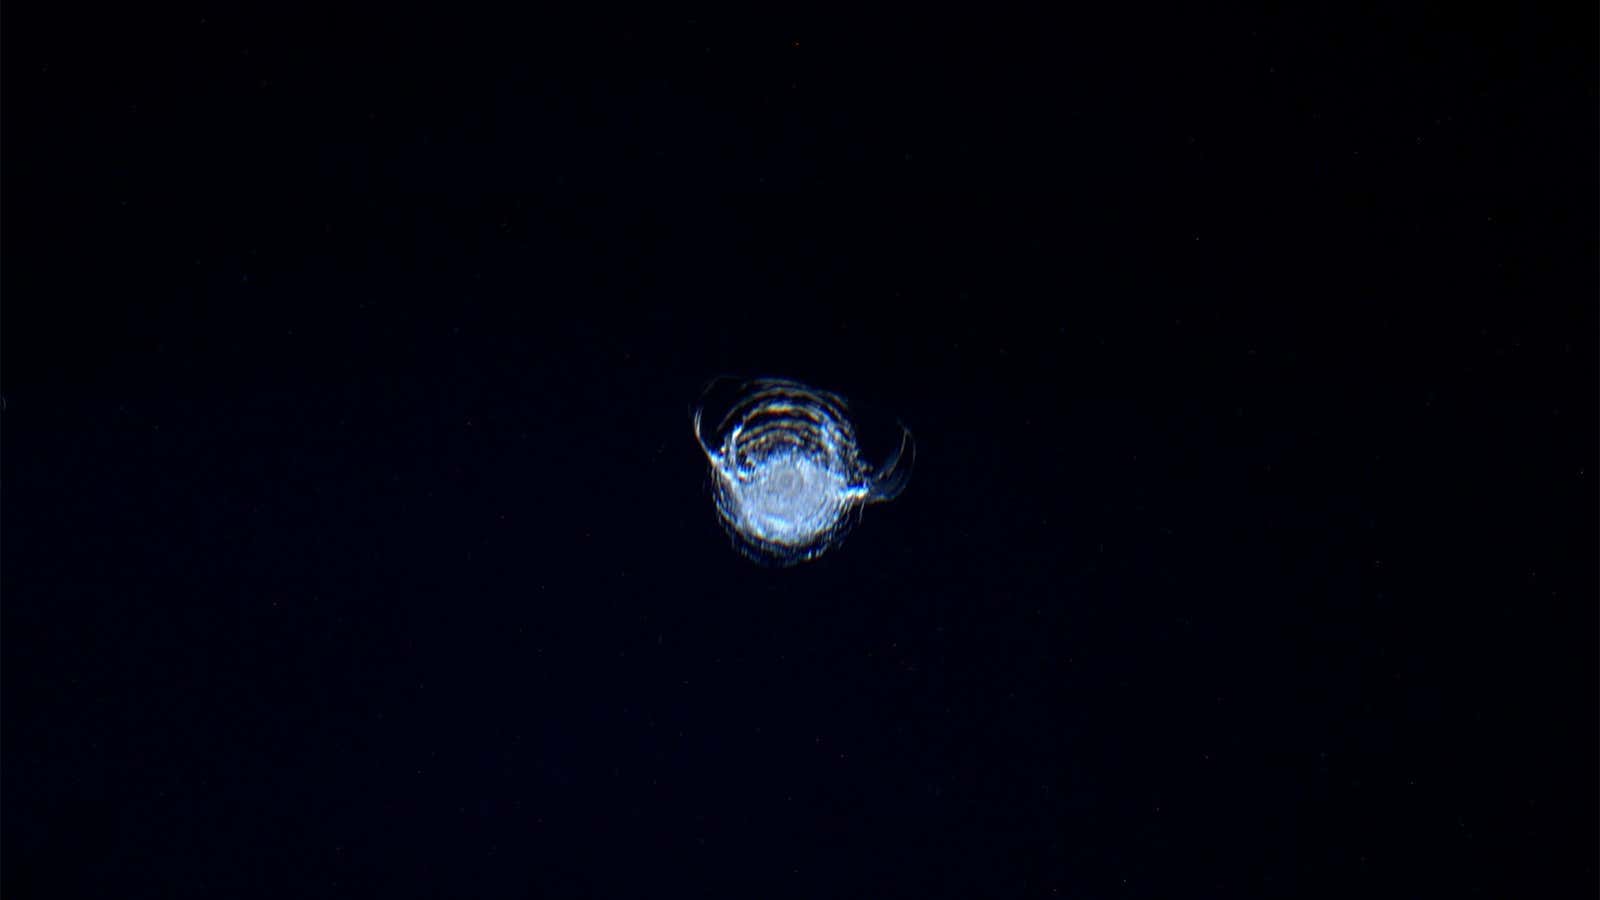 This chip in the window of the International Space Station was caused by orbital debris.